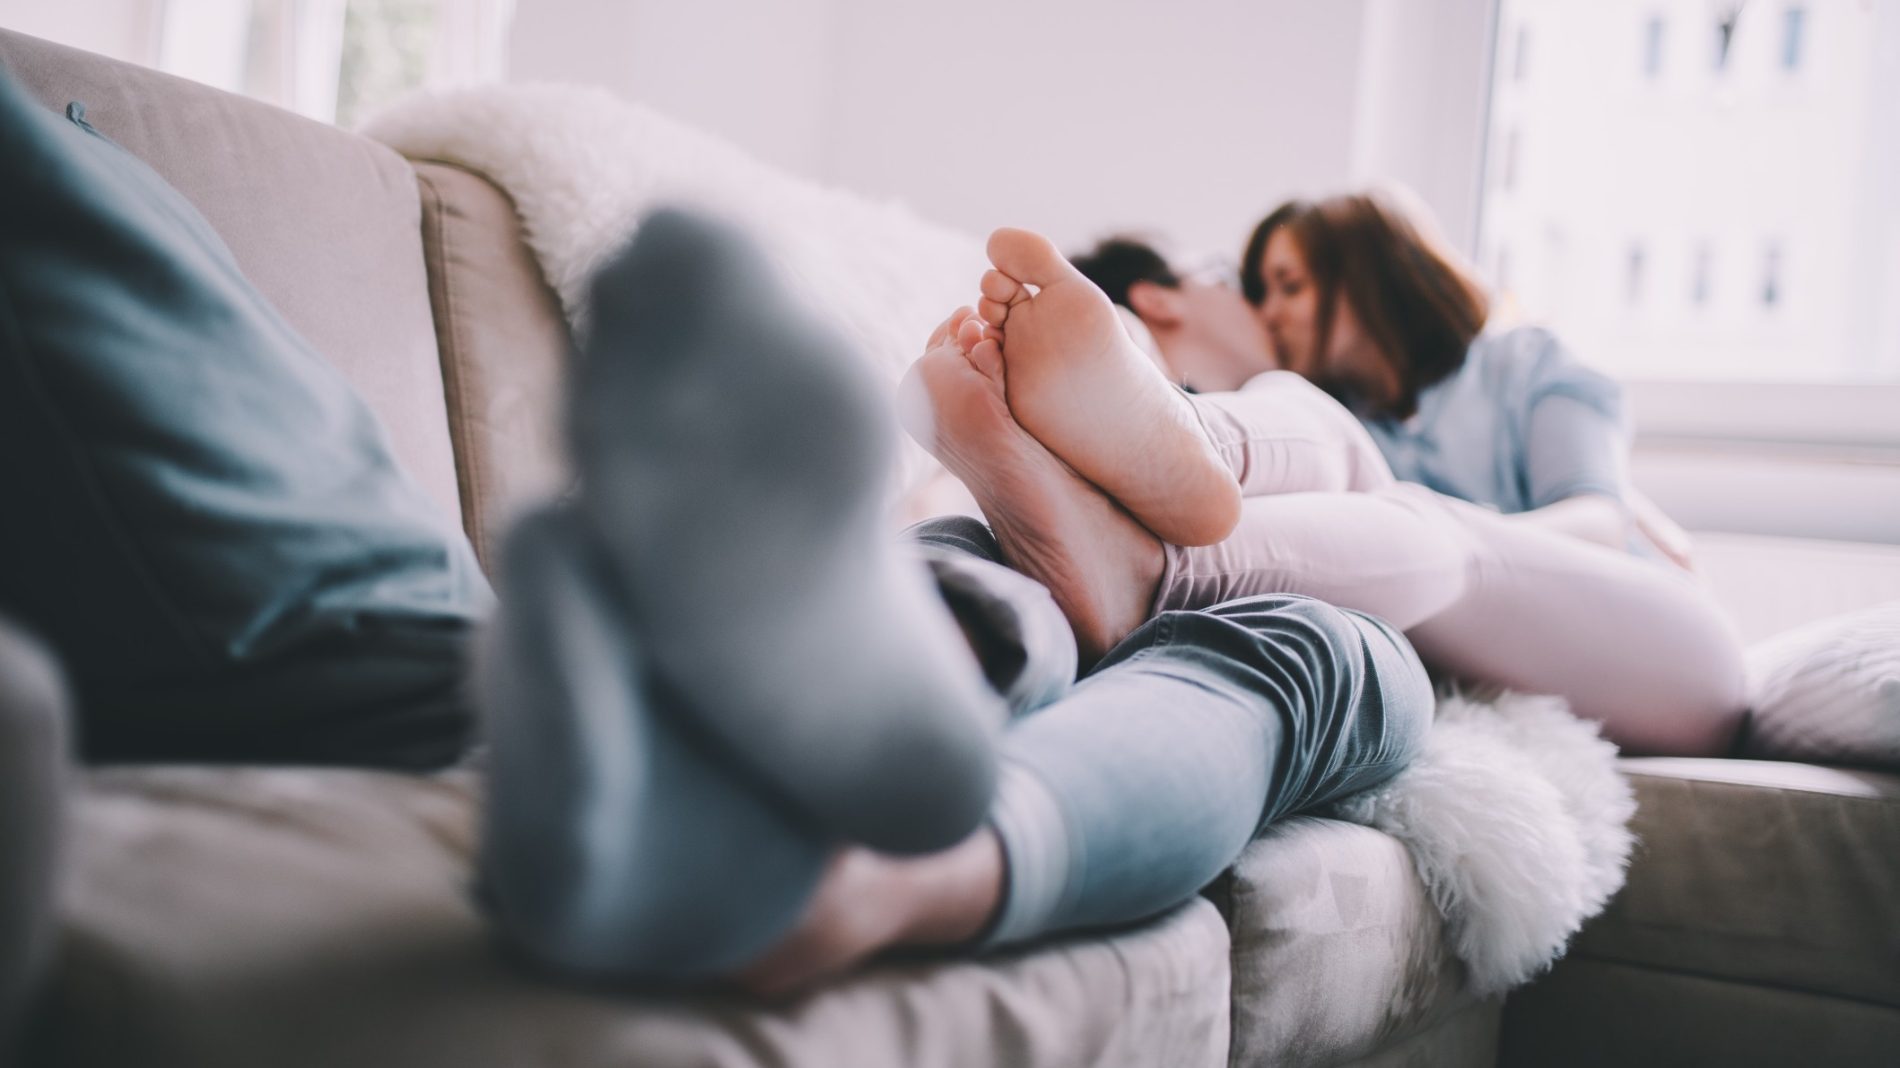 close-up-kissing-love-sofa-feet-home-couch-youth-laying-down-cuddling_t20_XQeoLR